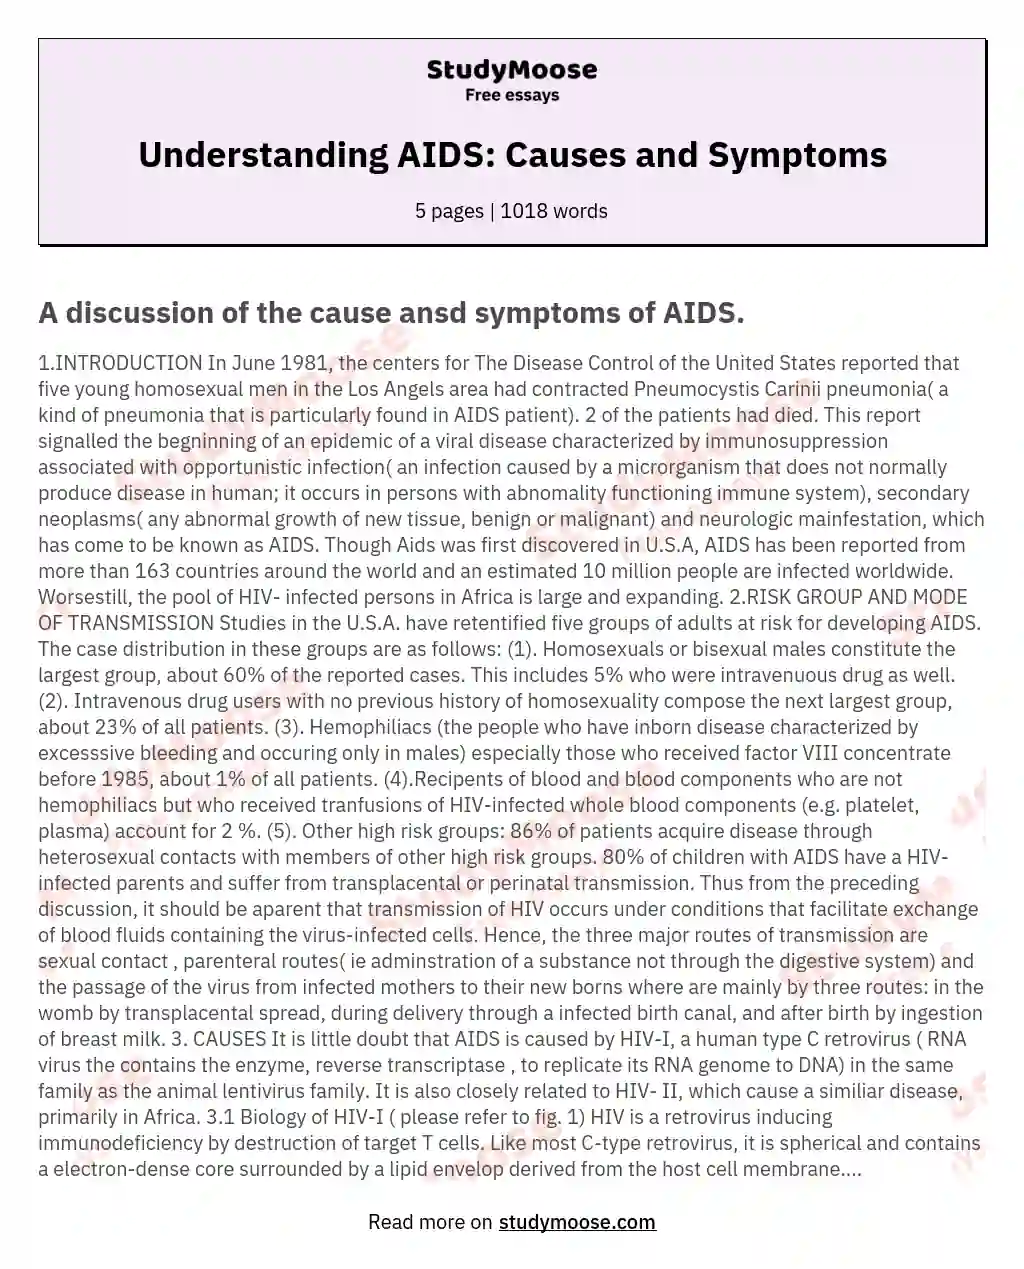 Understanding AIDS: Causes and Symptoms essay